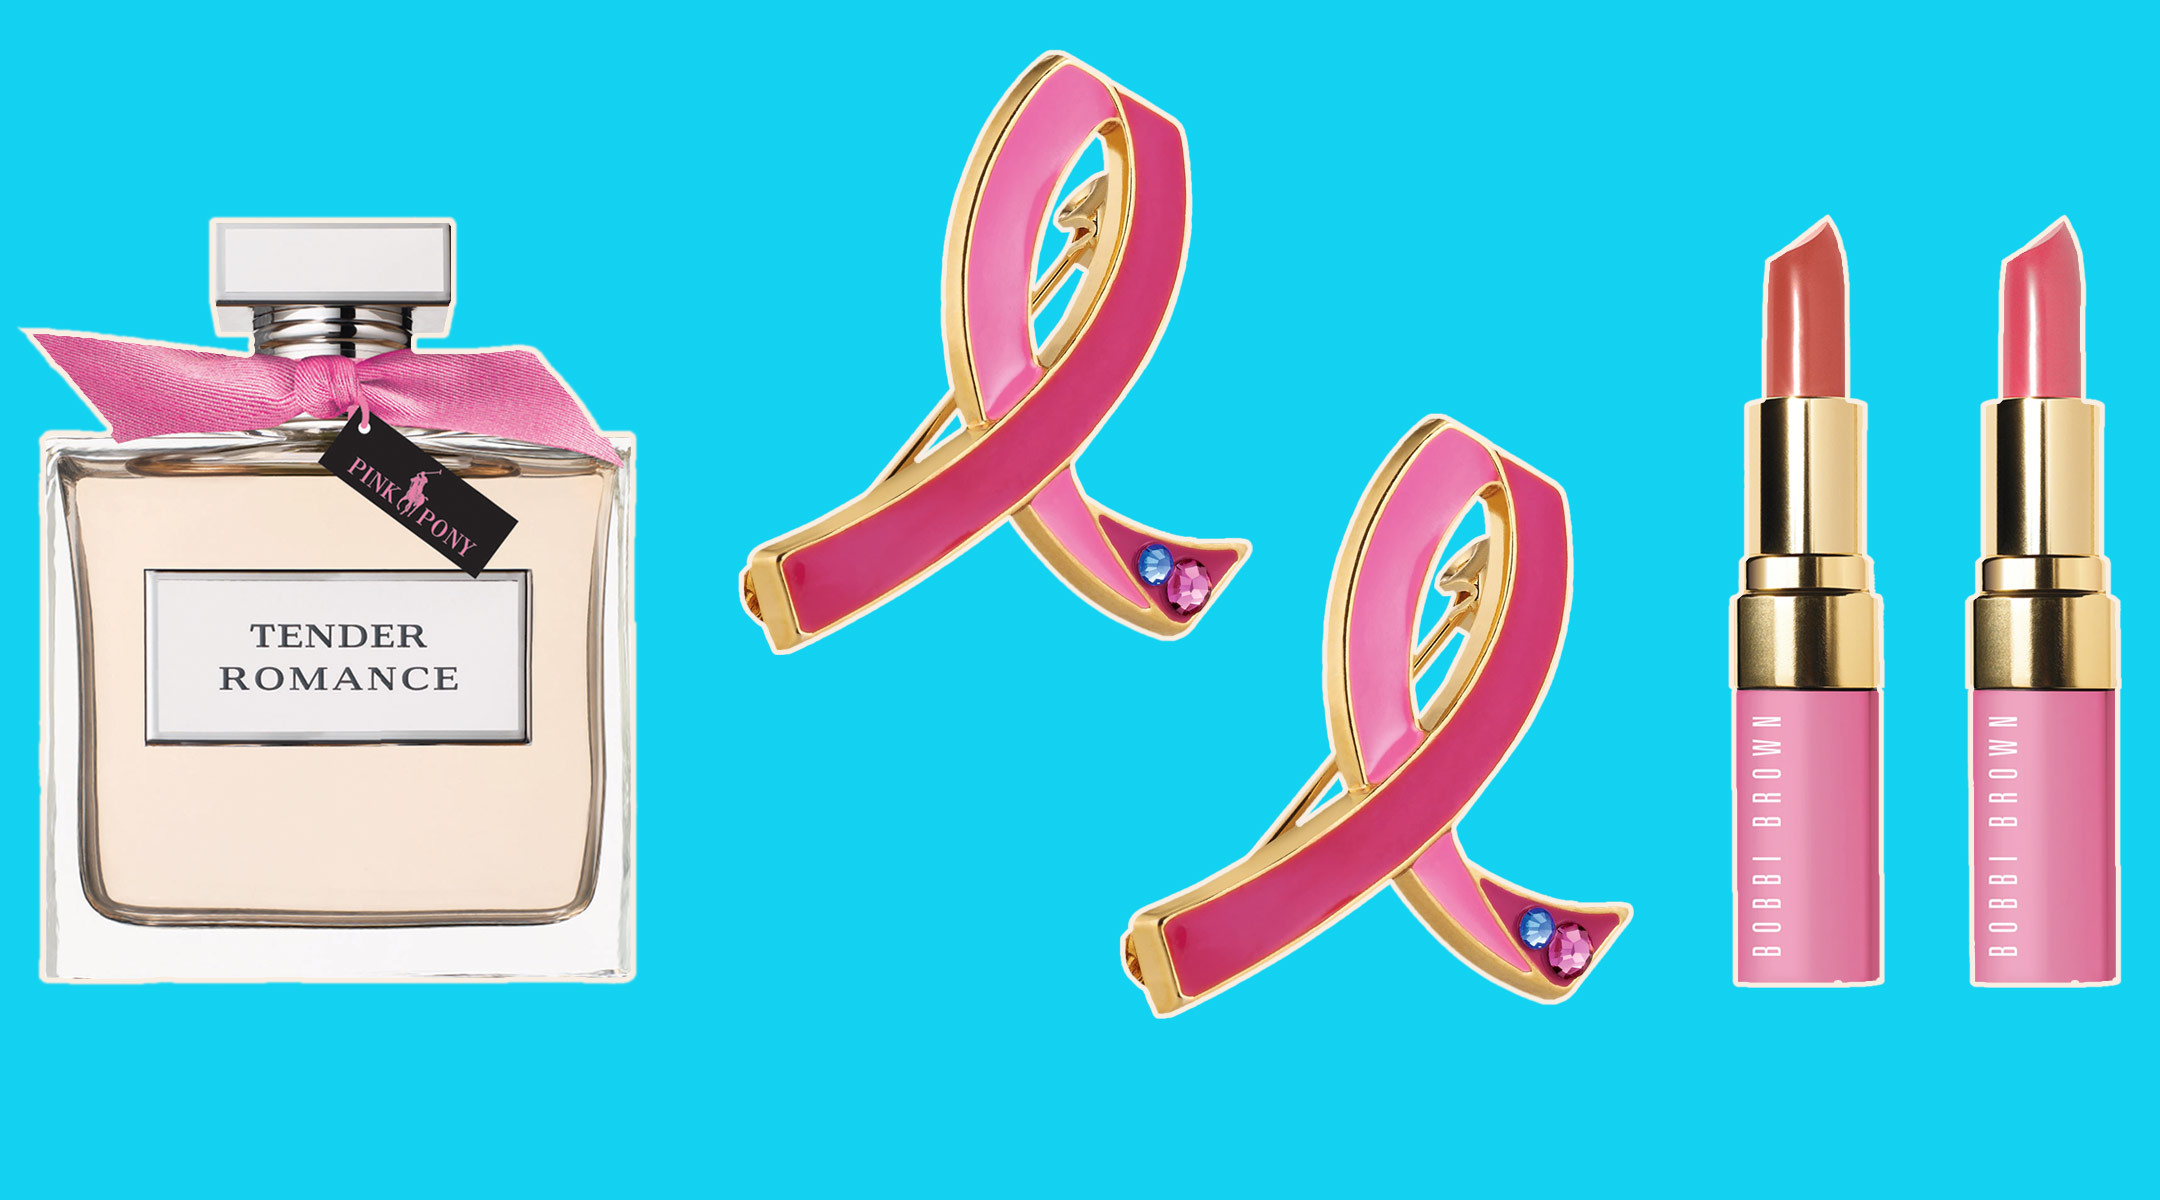 products that support breast cancer research